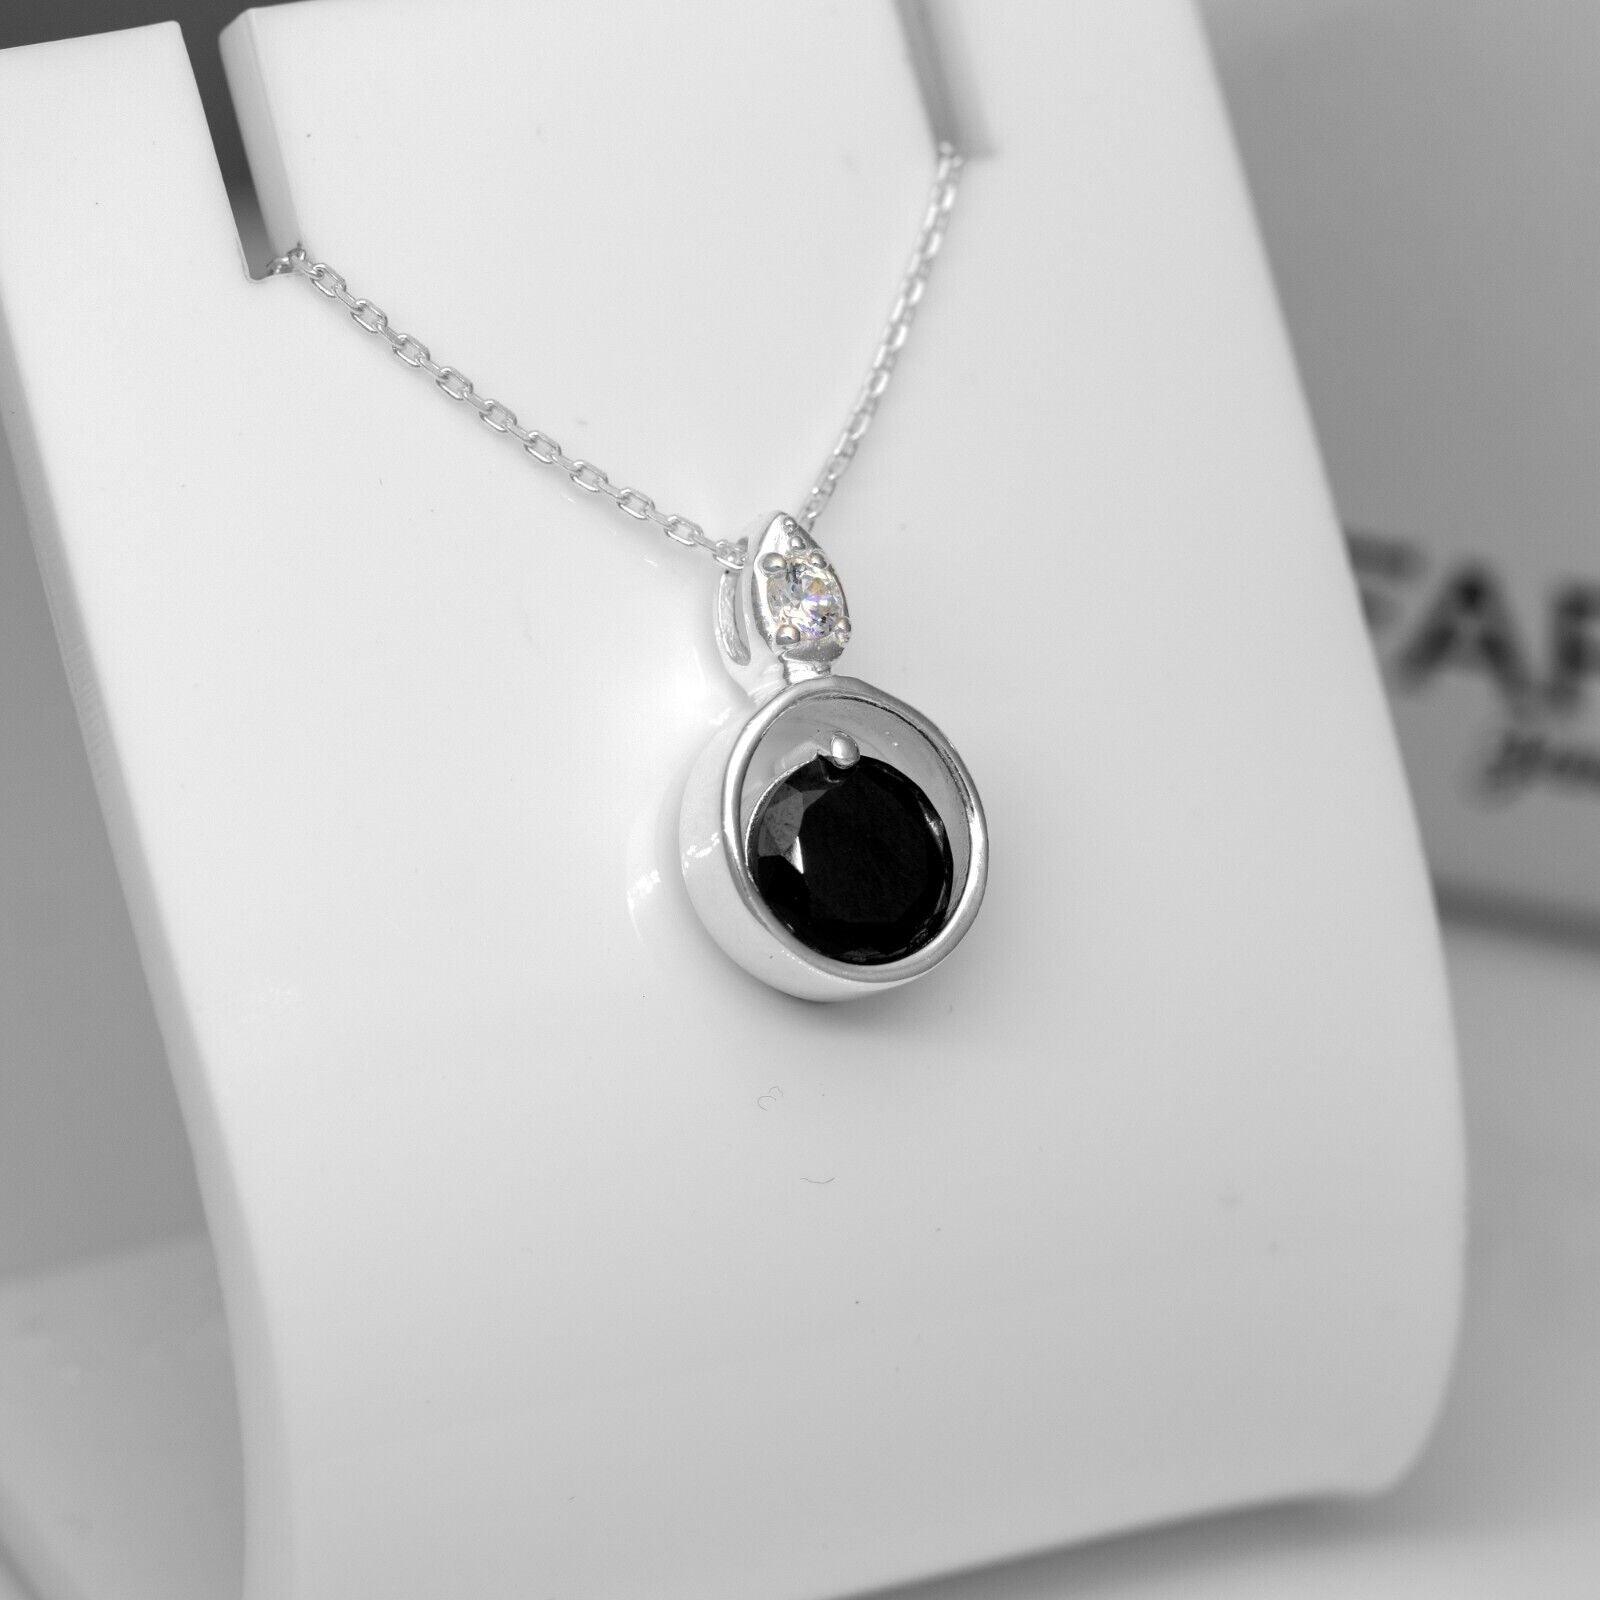 Black Onyx And Zirconia Sterling Silver Ladies Pendant Necklace Earrings Set